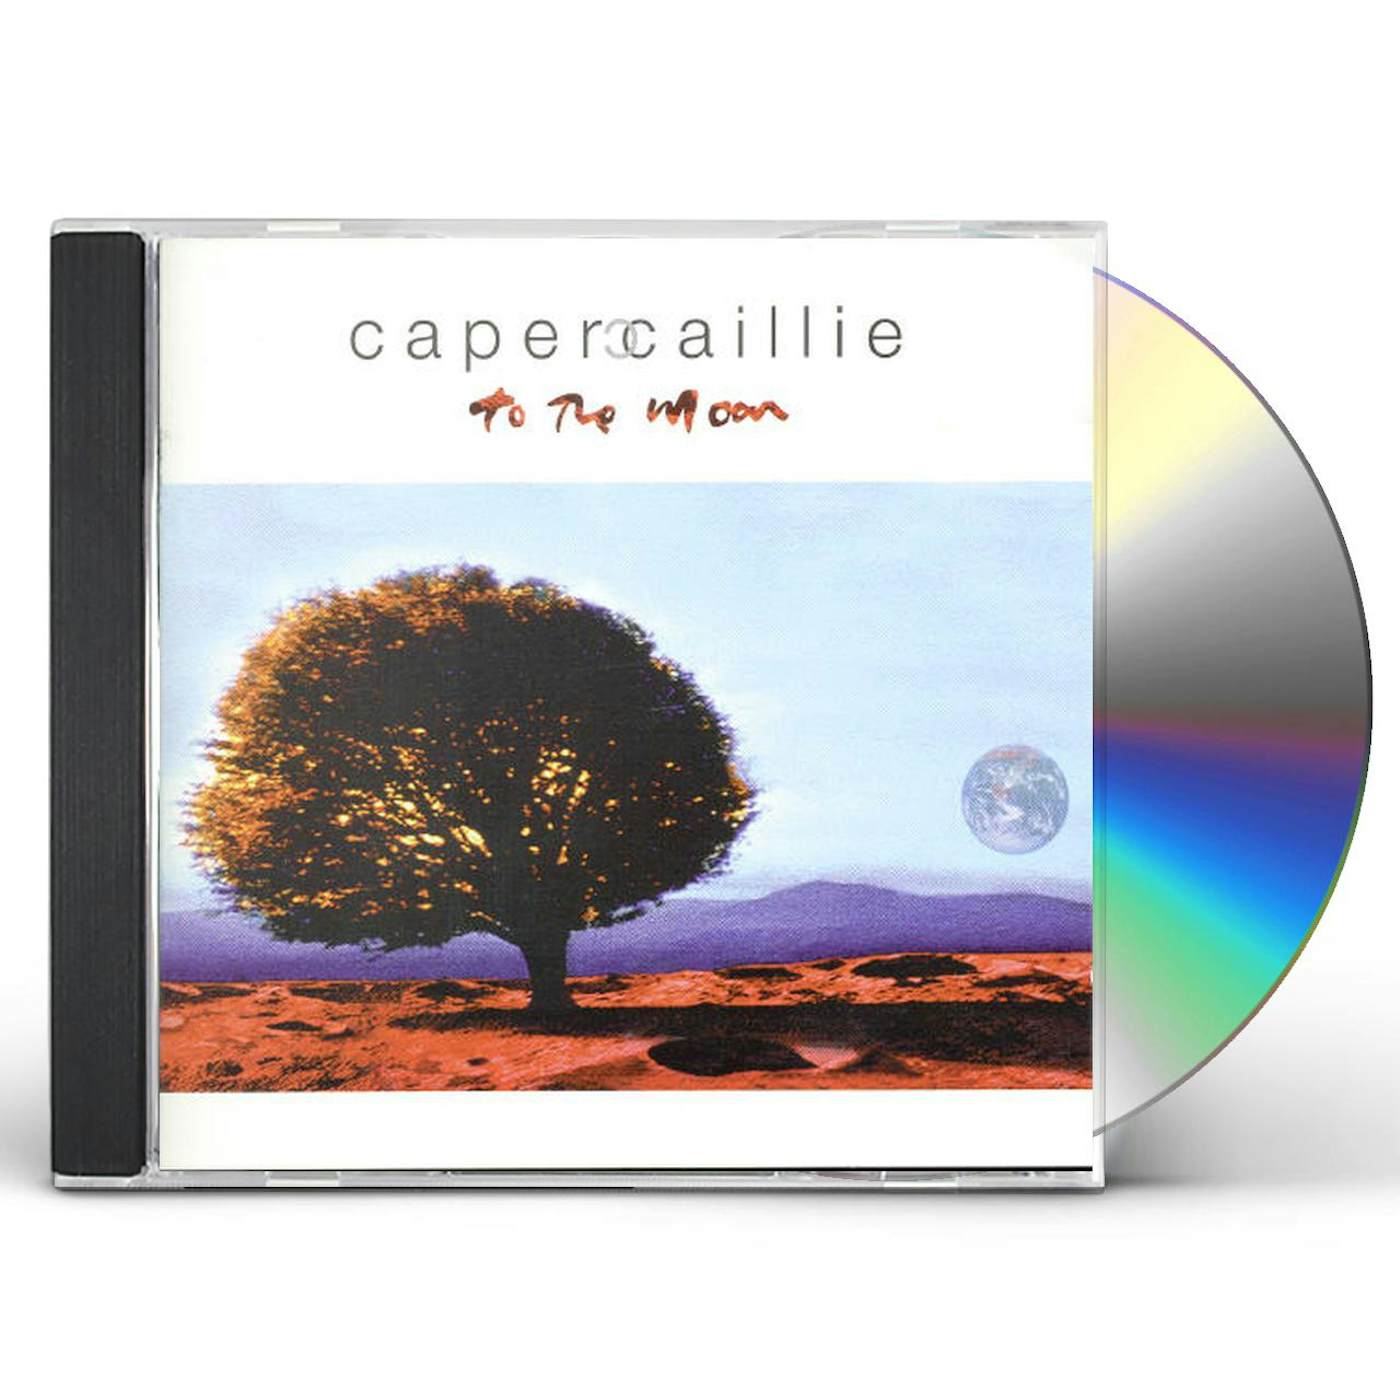 Capercaillie TO THE MOON CD